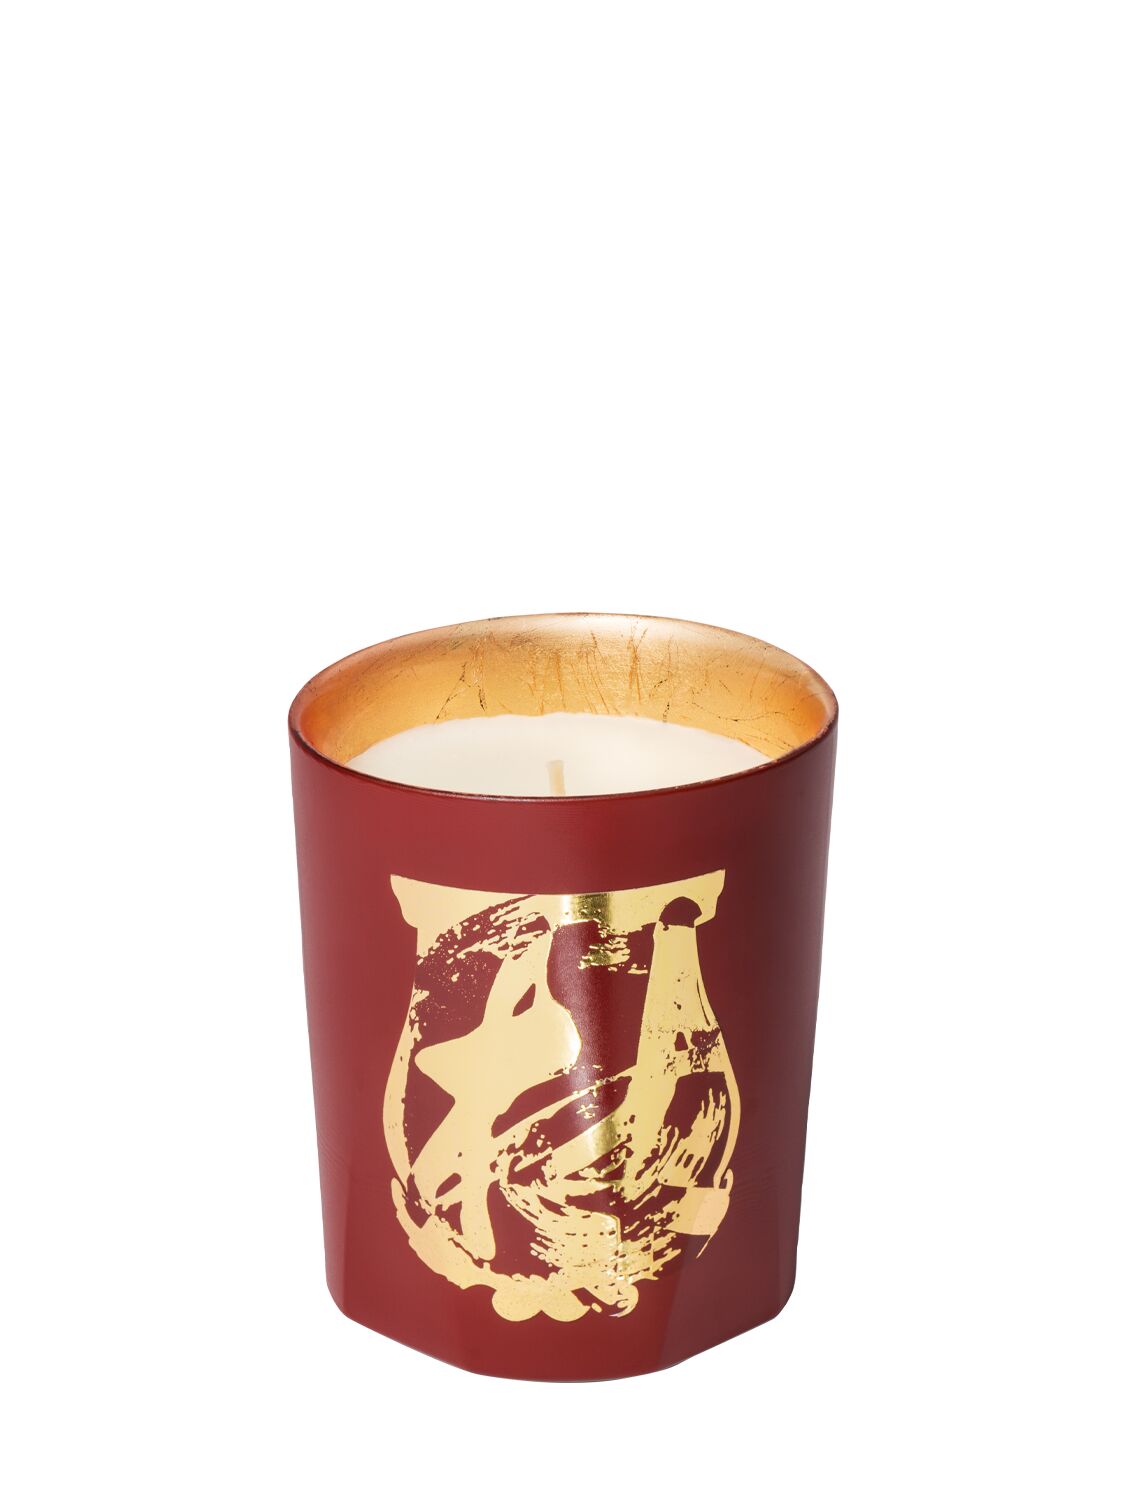 Trudon 270克terre À Terre Candle香氛蜡烛 In Red